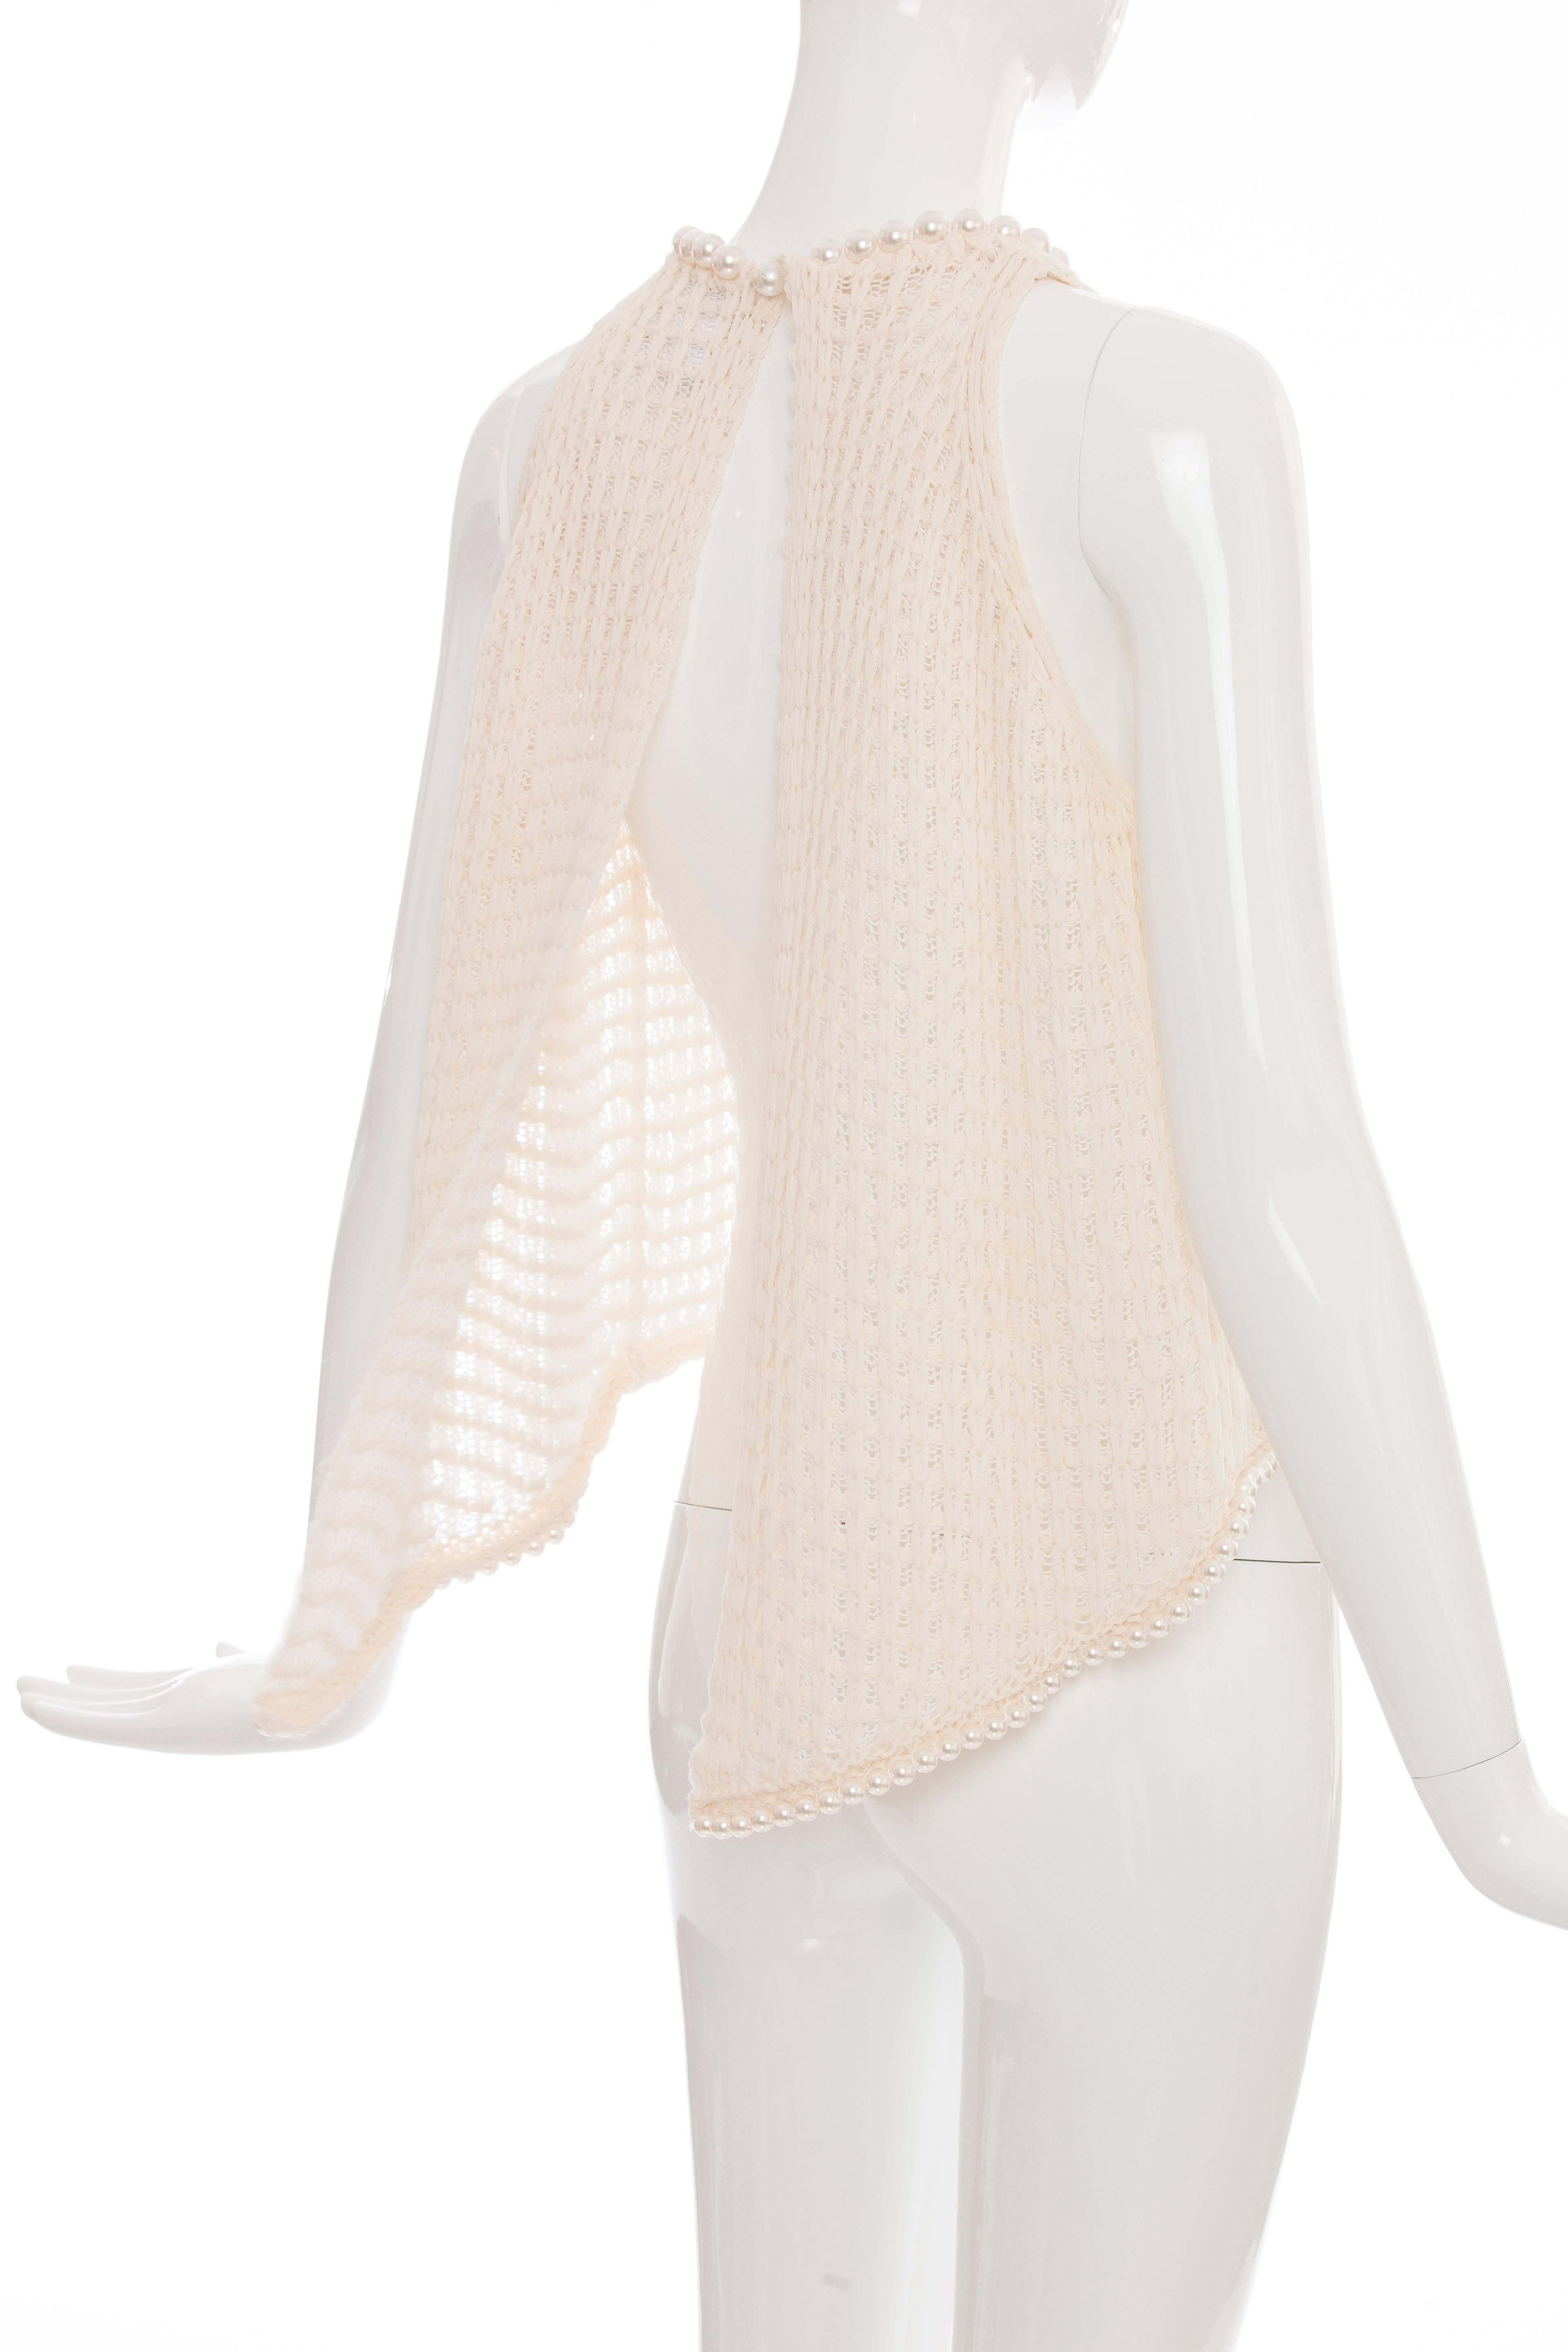 Chanel Cream Silk Blend Open Knit Top With Pearl Embellishments, Spring 2009 2